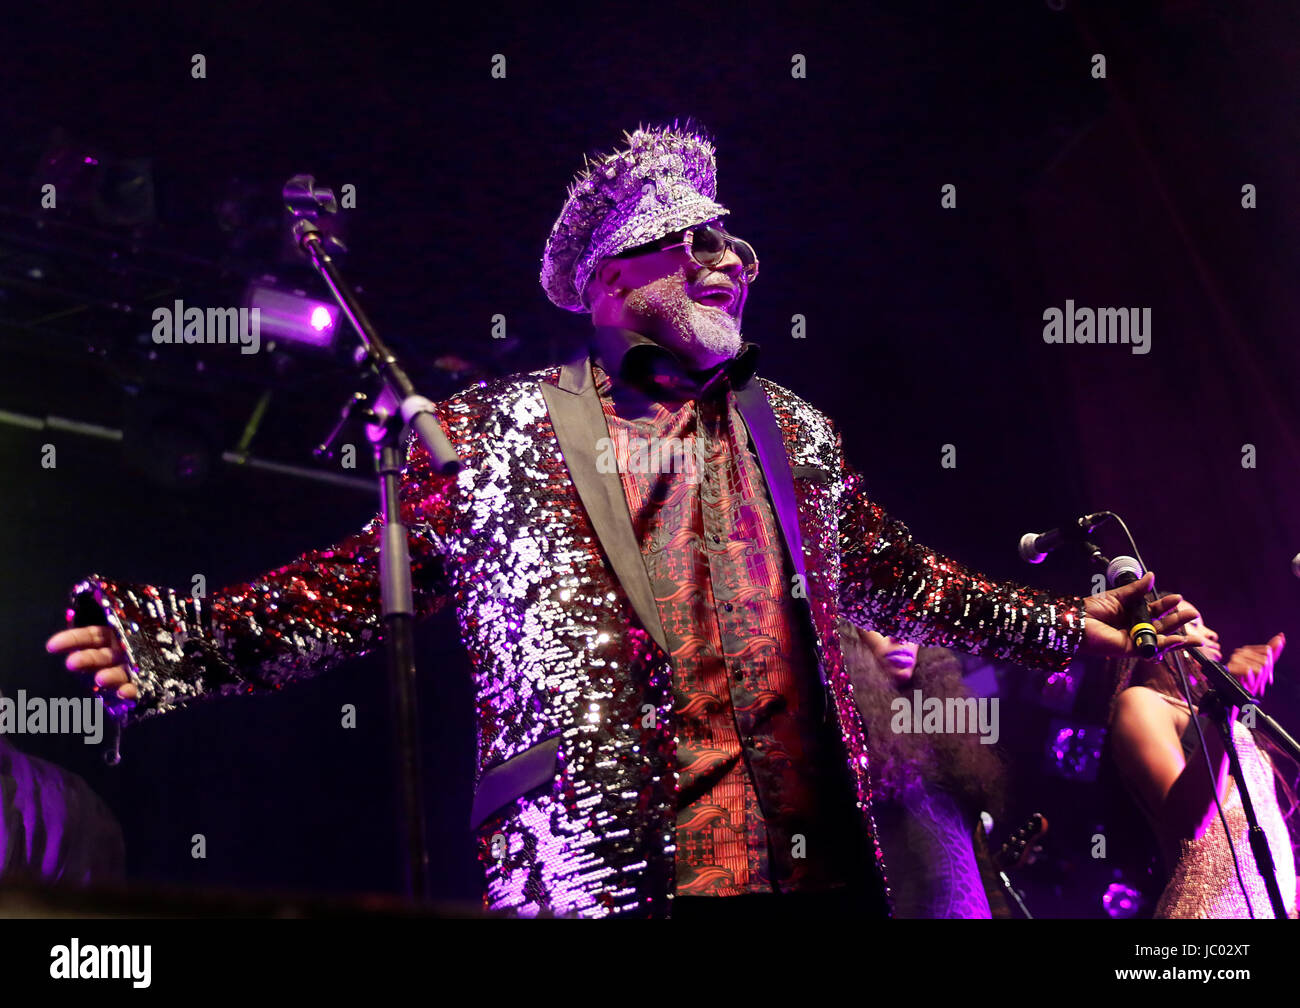 George Clinton & Parliament Funkadelic Performing at Manchester O2 Ritz  Featuring: George Clinton, Parliament Funkadelic Where: Manchester, United Kingdom When: 12 May 2017 Credit: Sakura/WENN.com Stock Photo